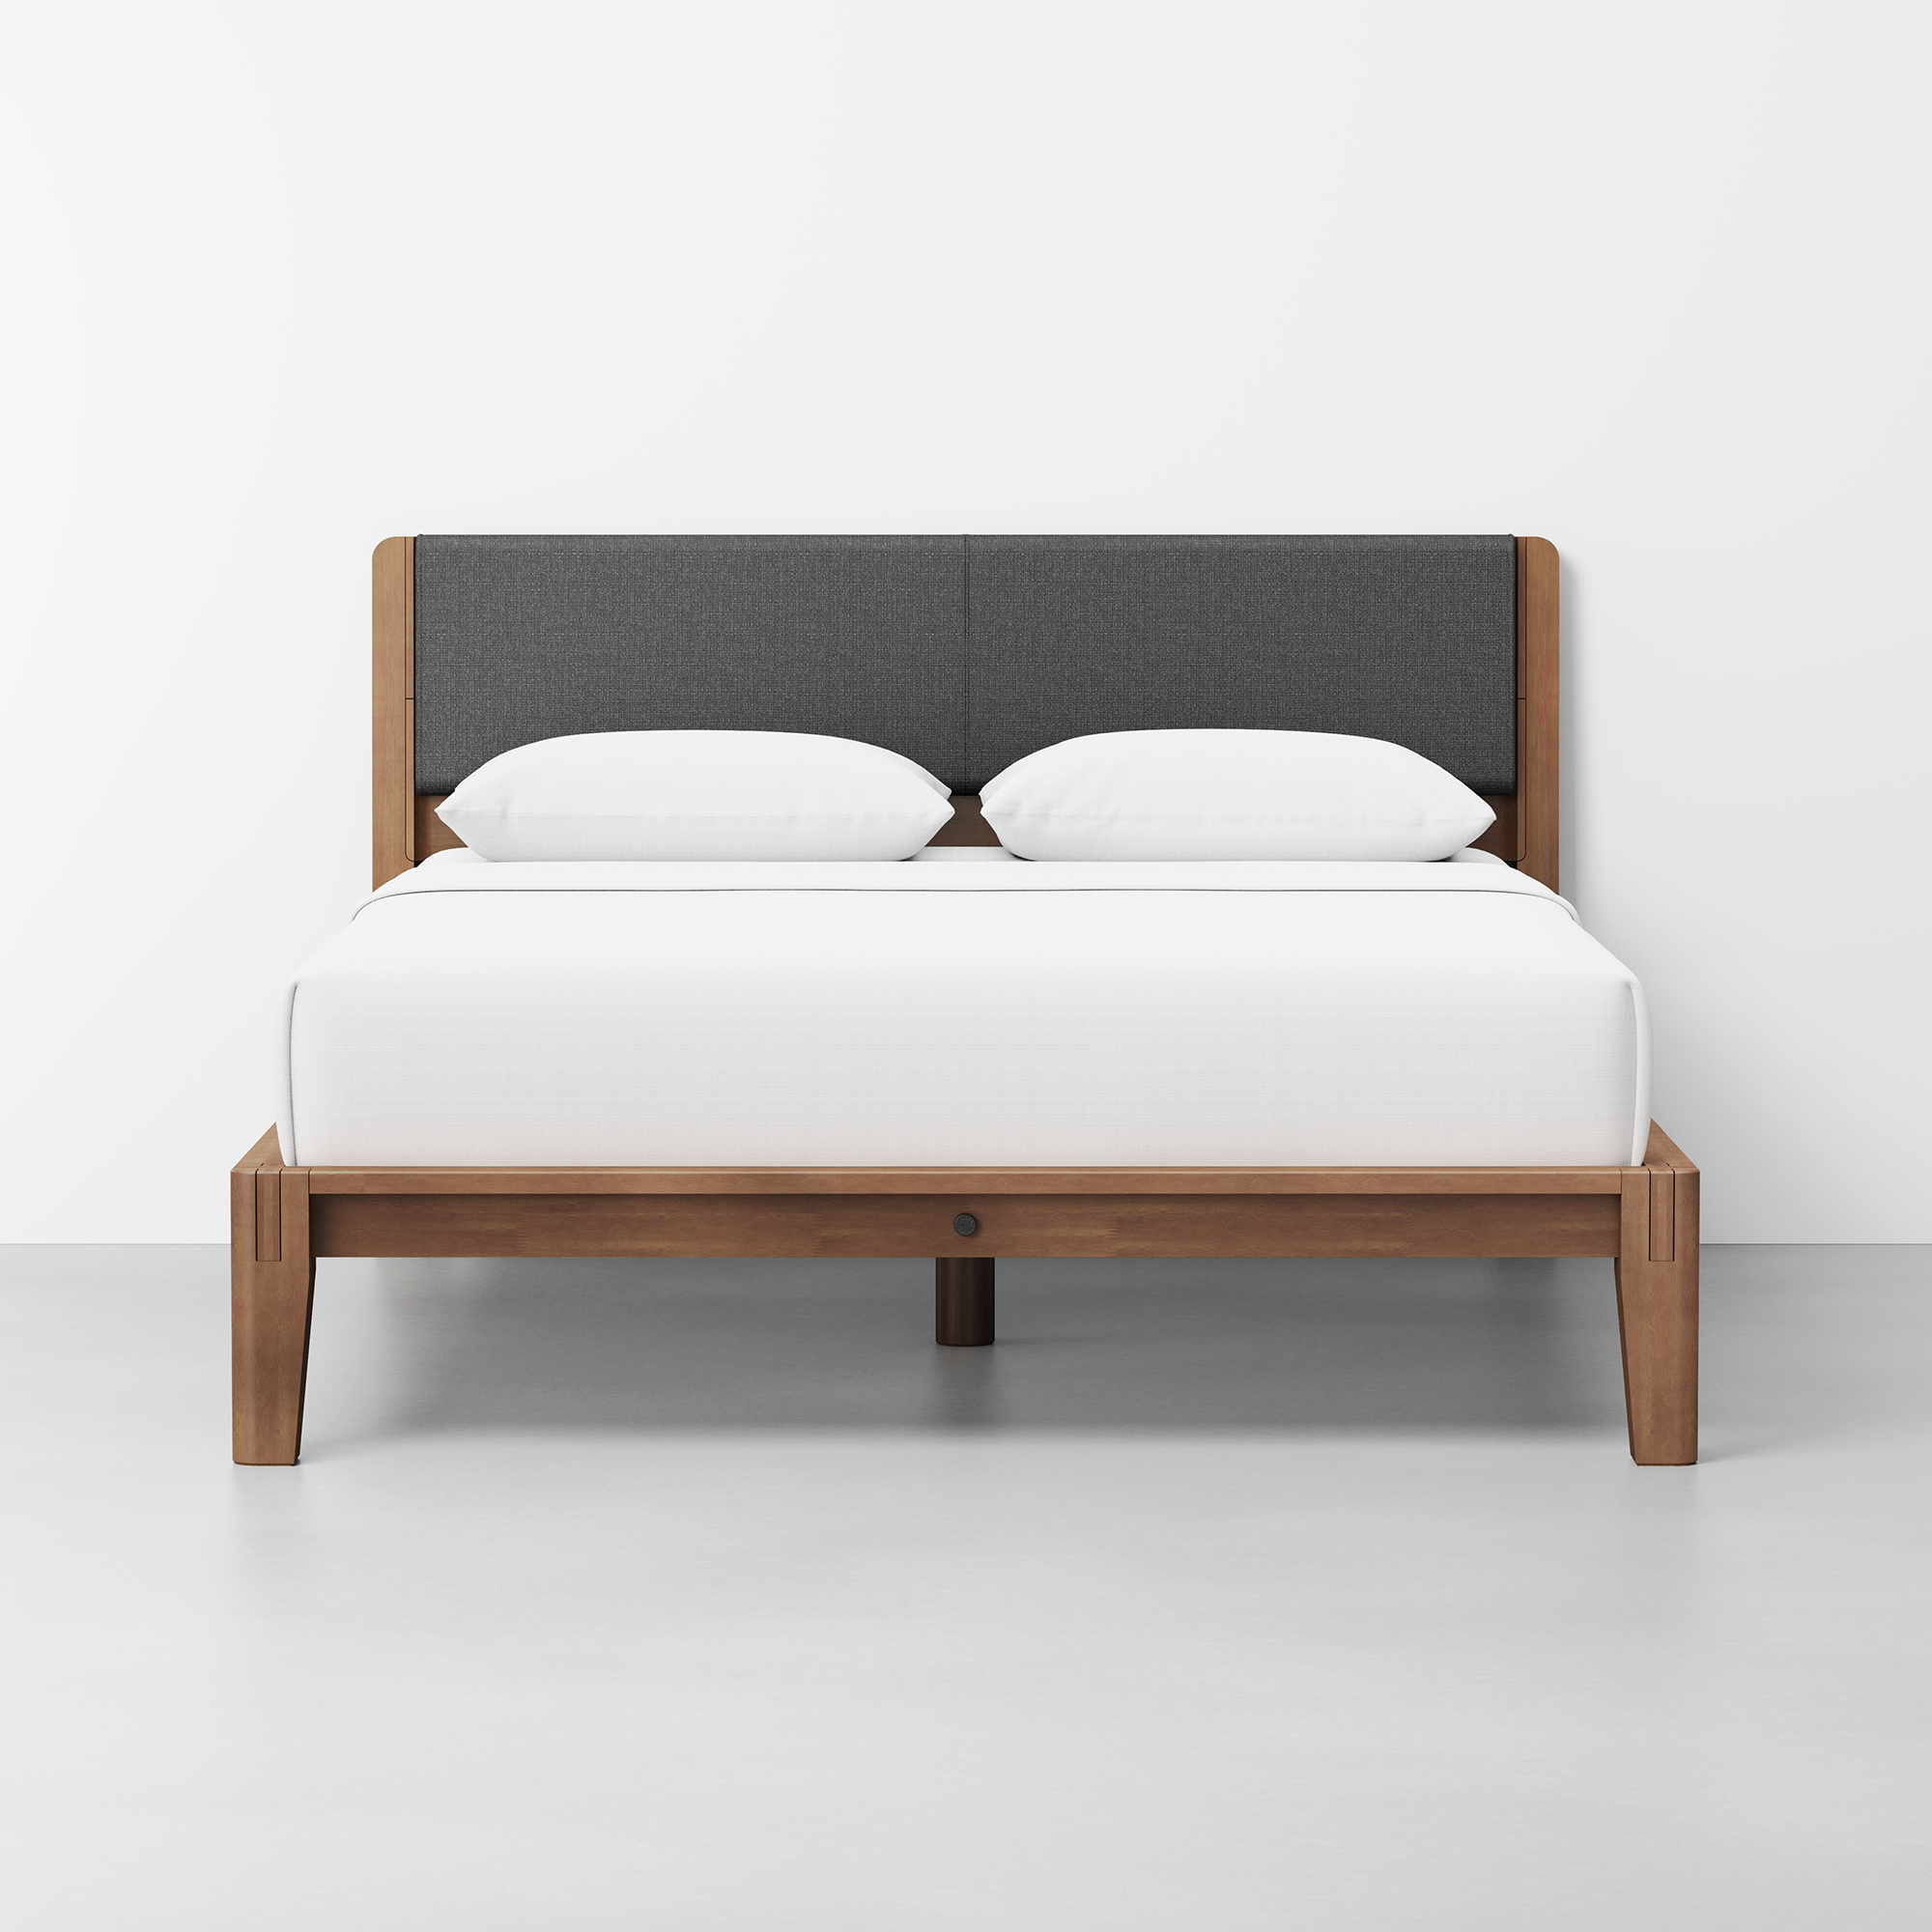 The Bed (Walnut / HB Cushion Dark Charcoal) - Render - Front